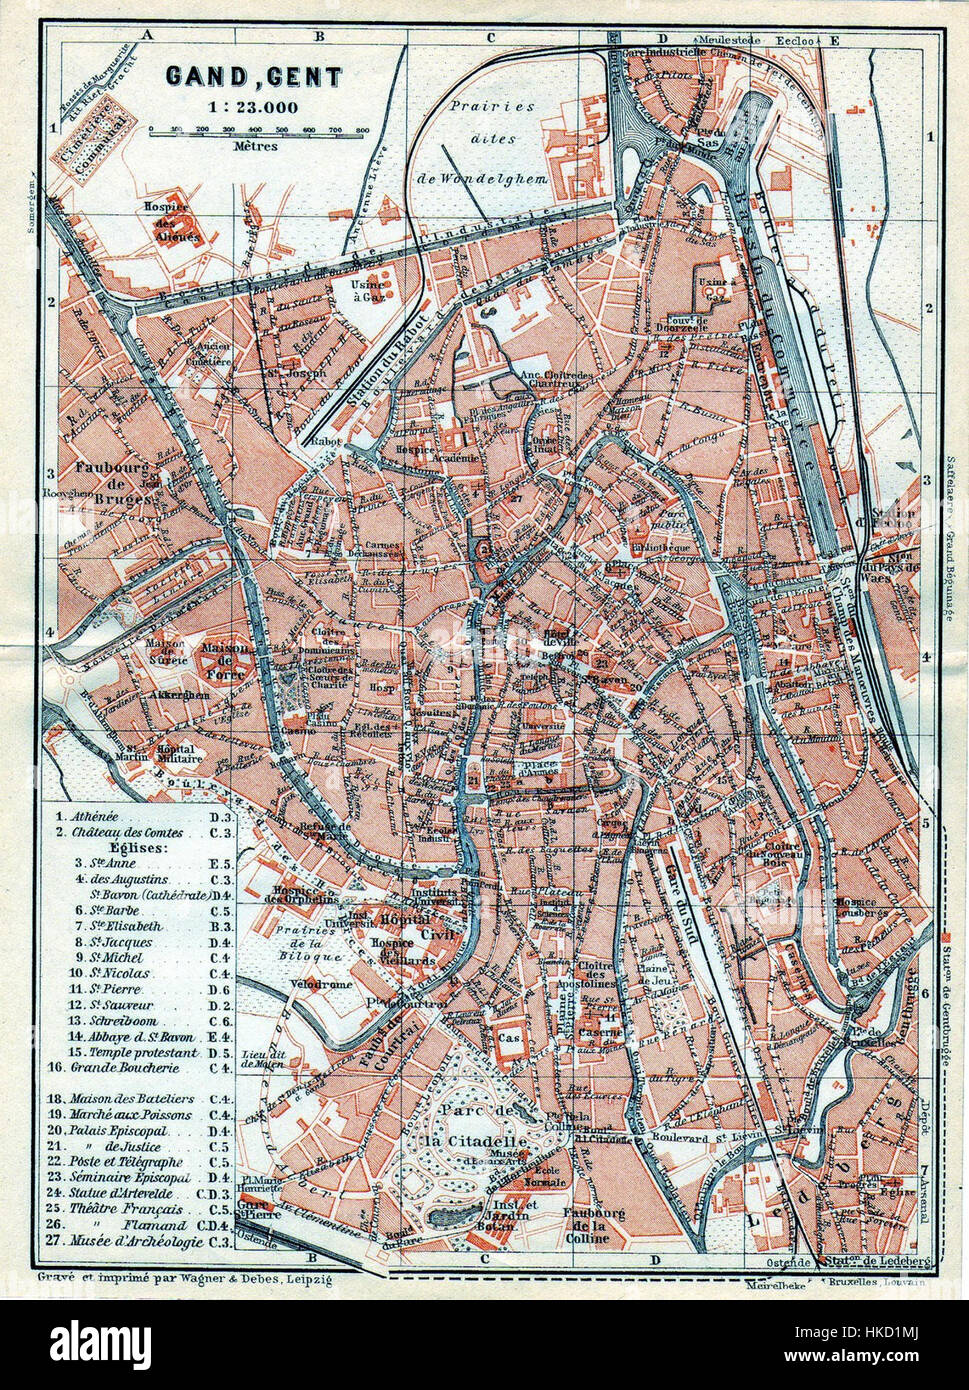 Ghent map, Wagner and Debes, 1910 Stock Photo